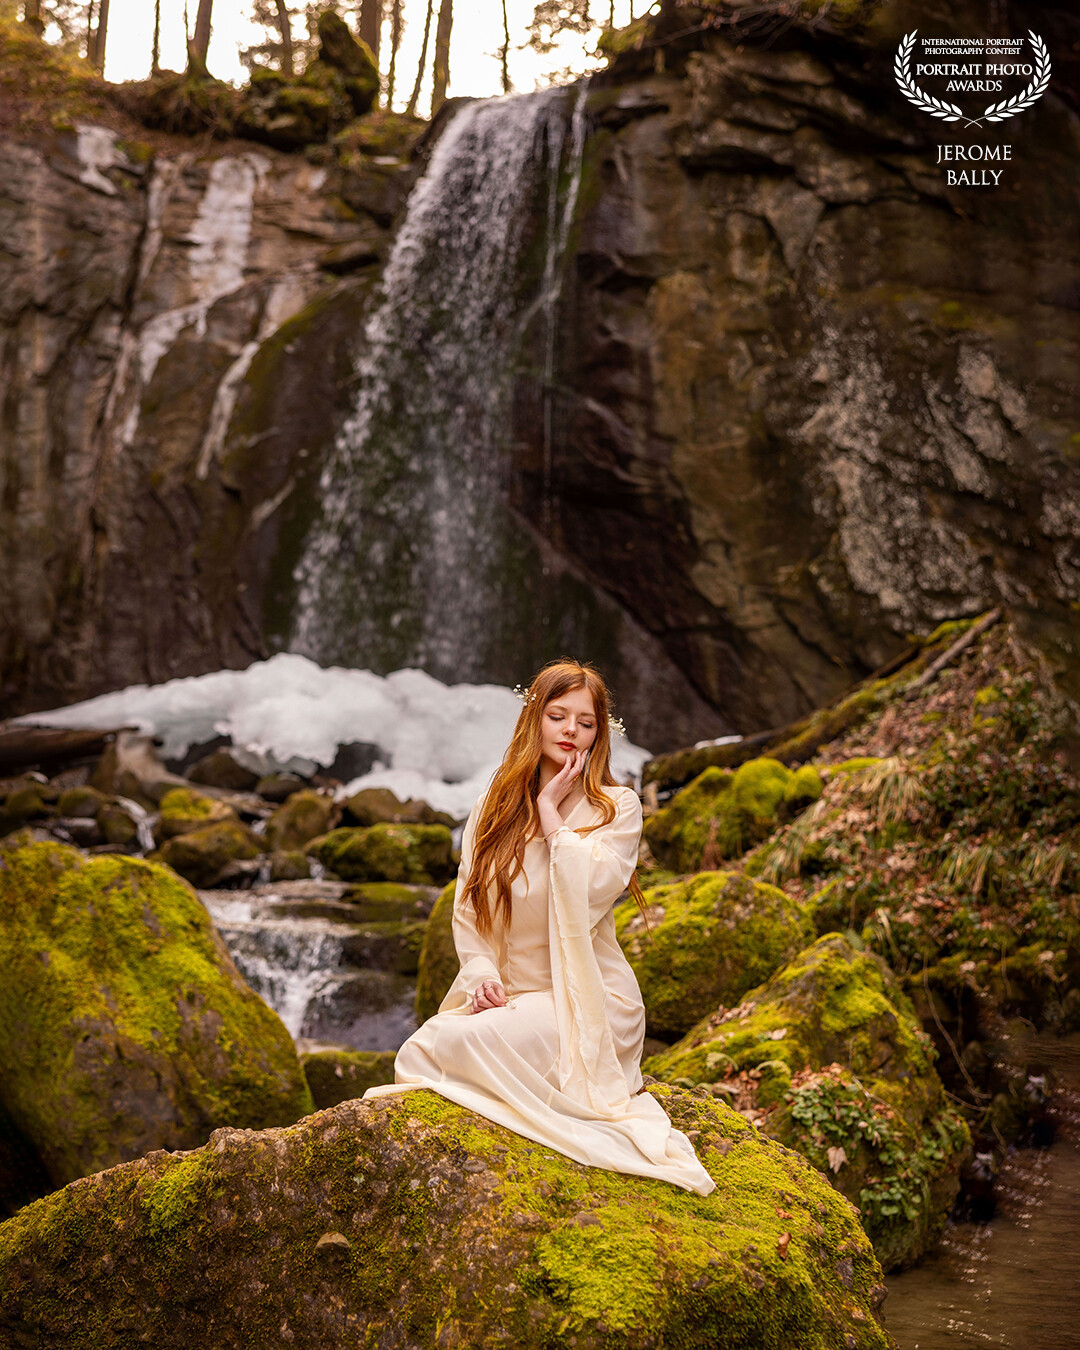 Inspired by Lord of the Rings and the elves, we headed to this waterfall to take these amazing pictures